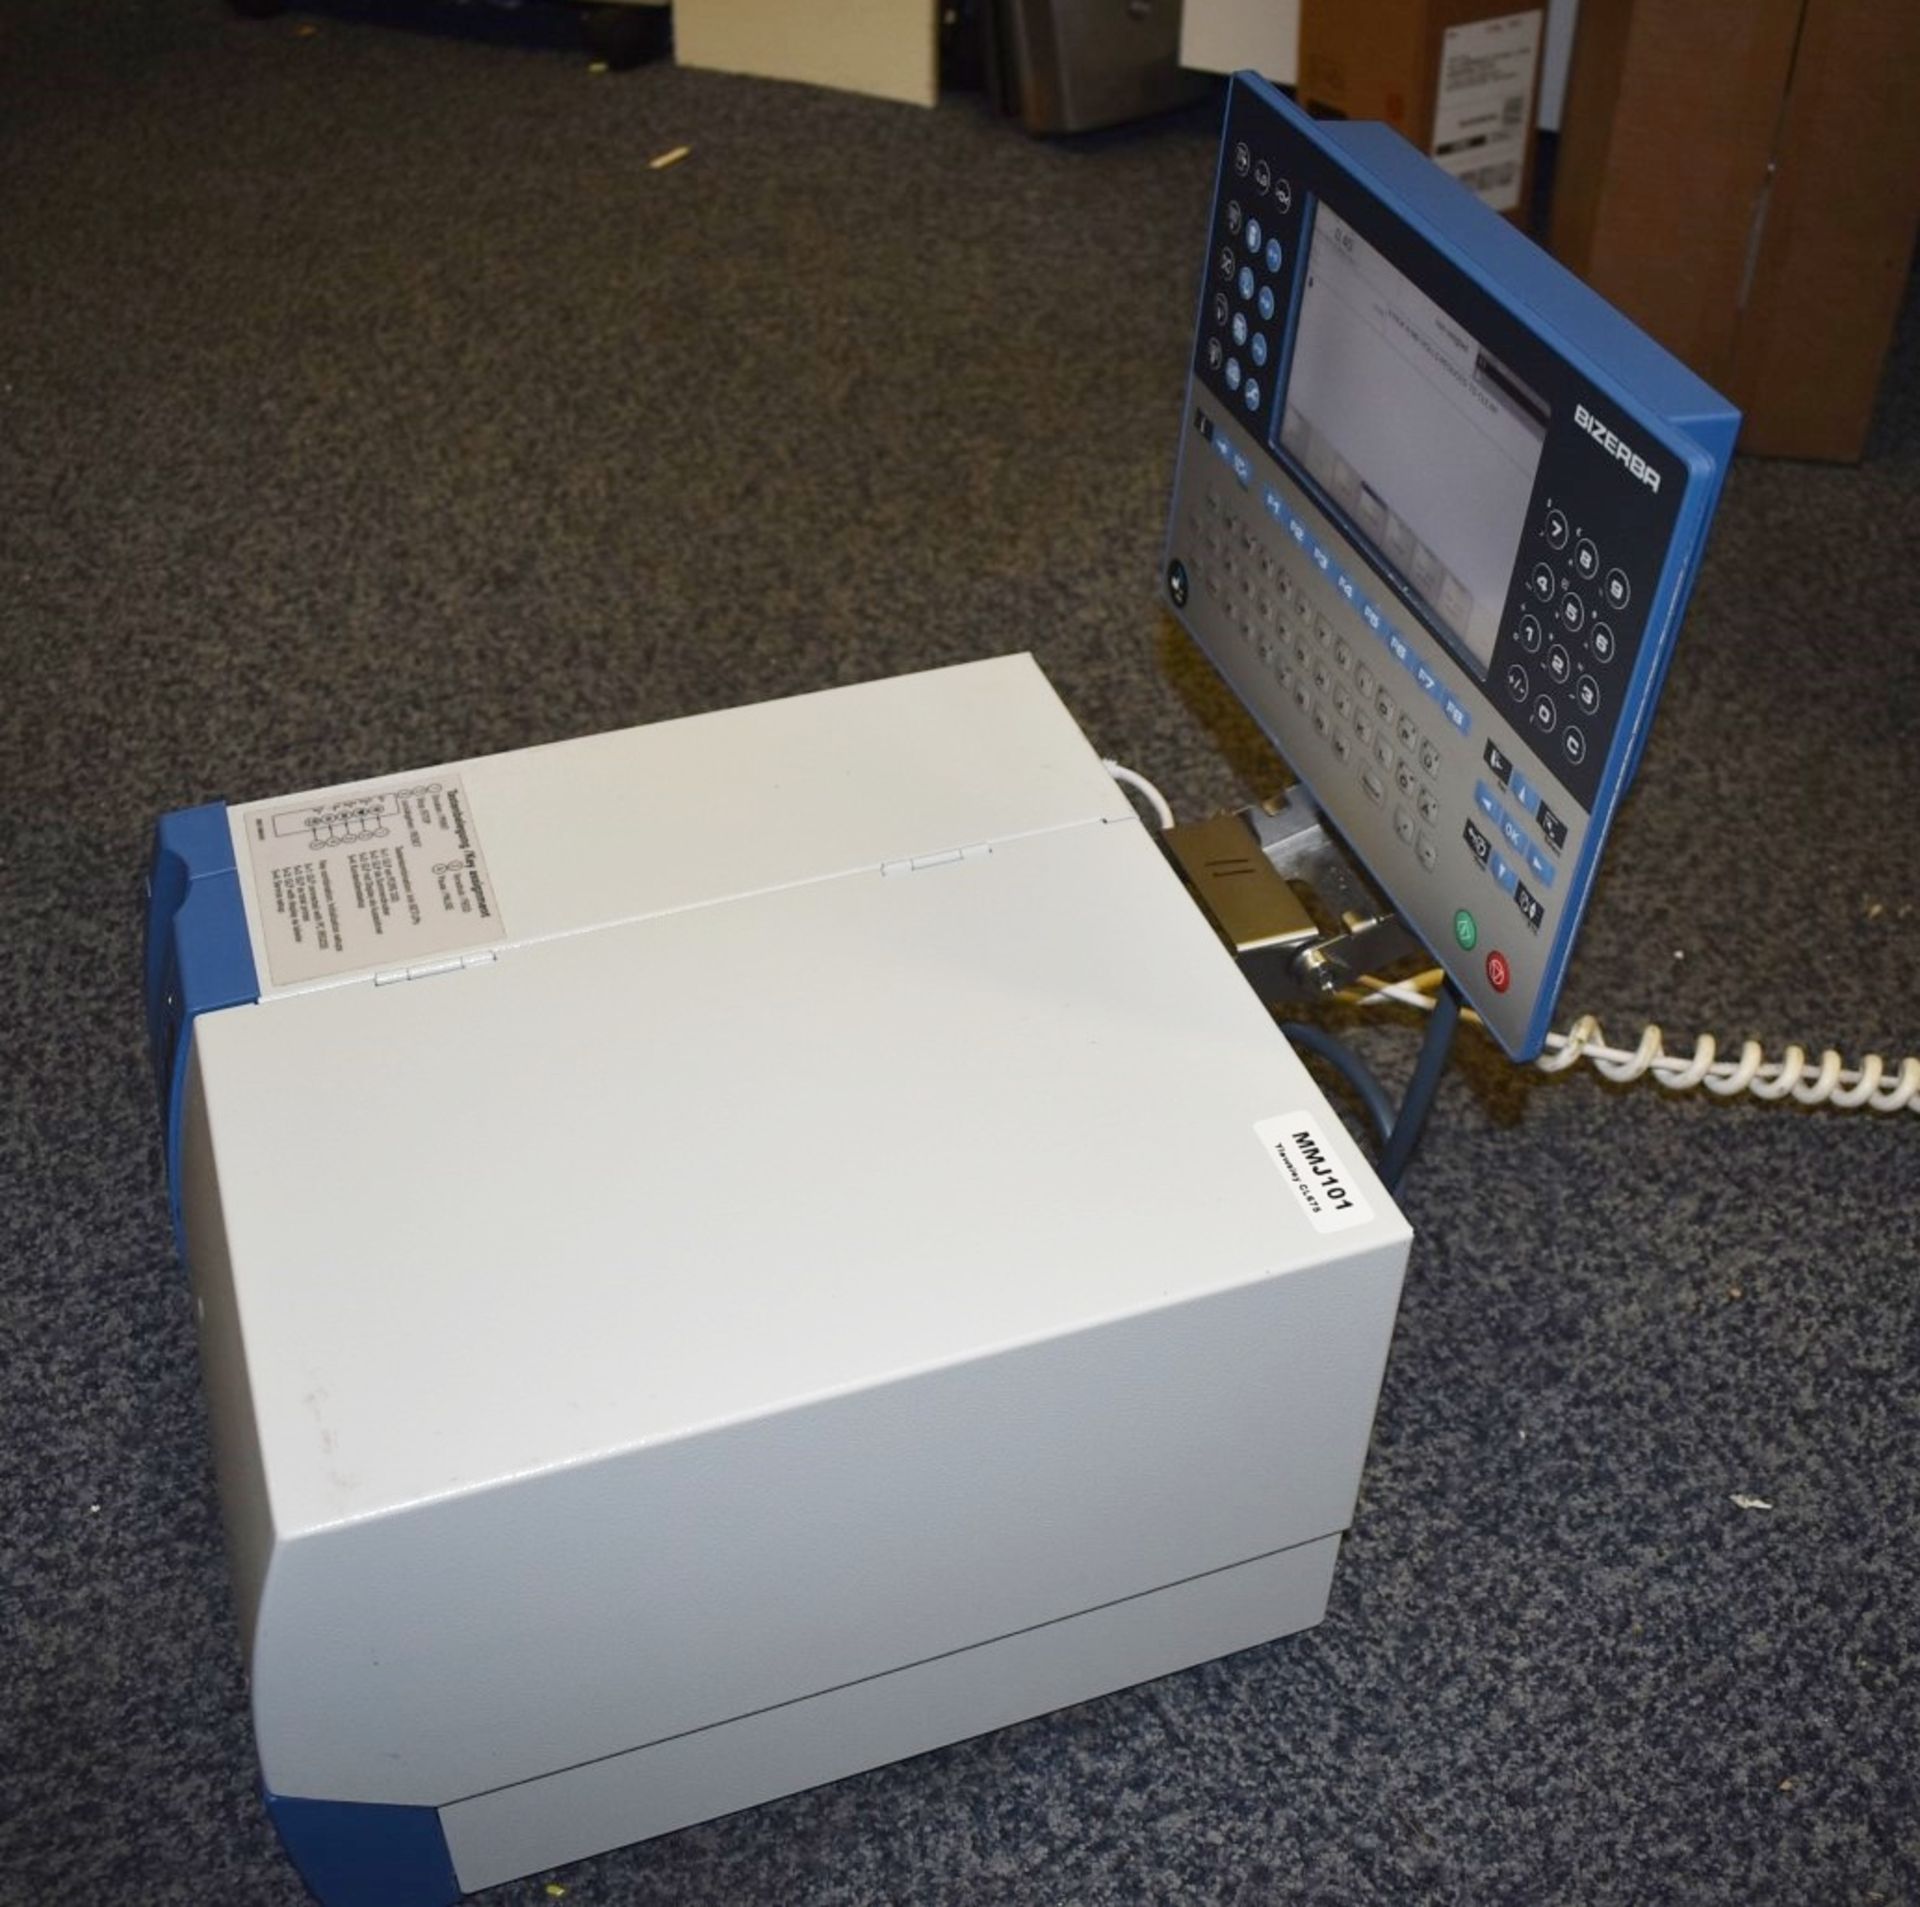 1 x Bizerba Industrial Label Printer GLPmaxx 160 With Colour Screen - Recently Removed From a - Image 15 of 15